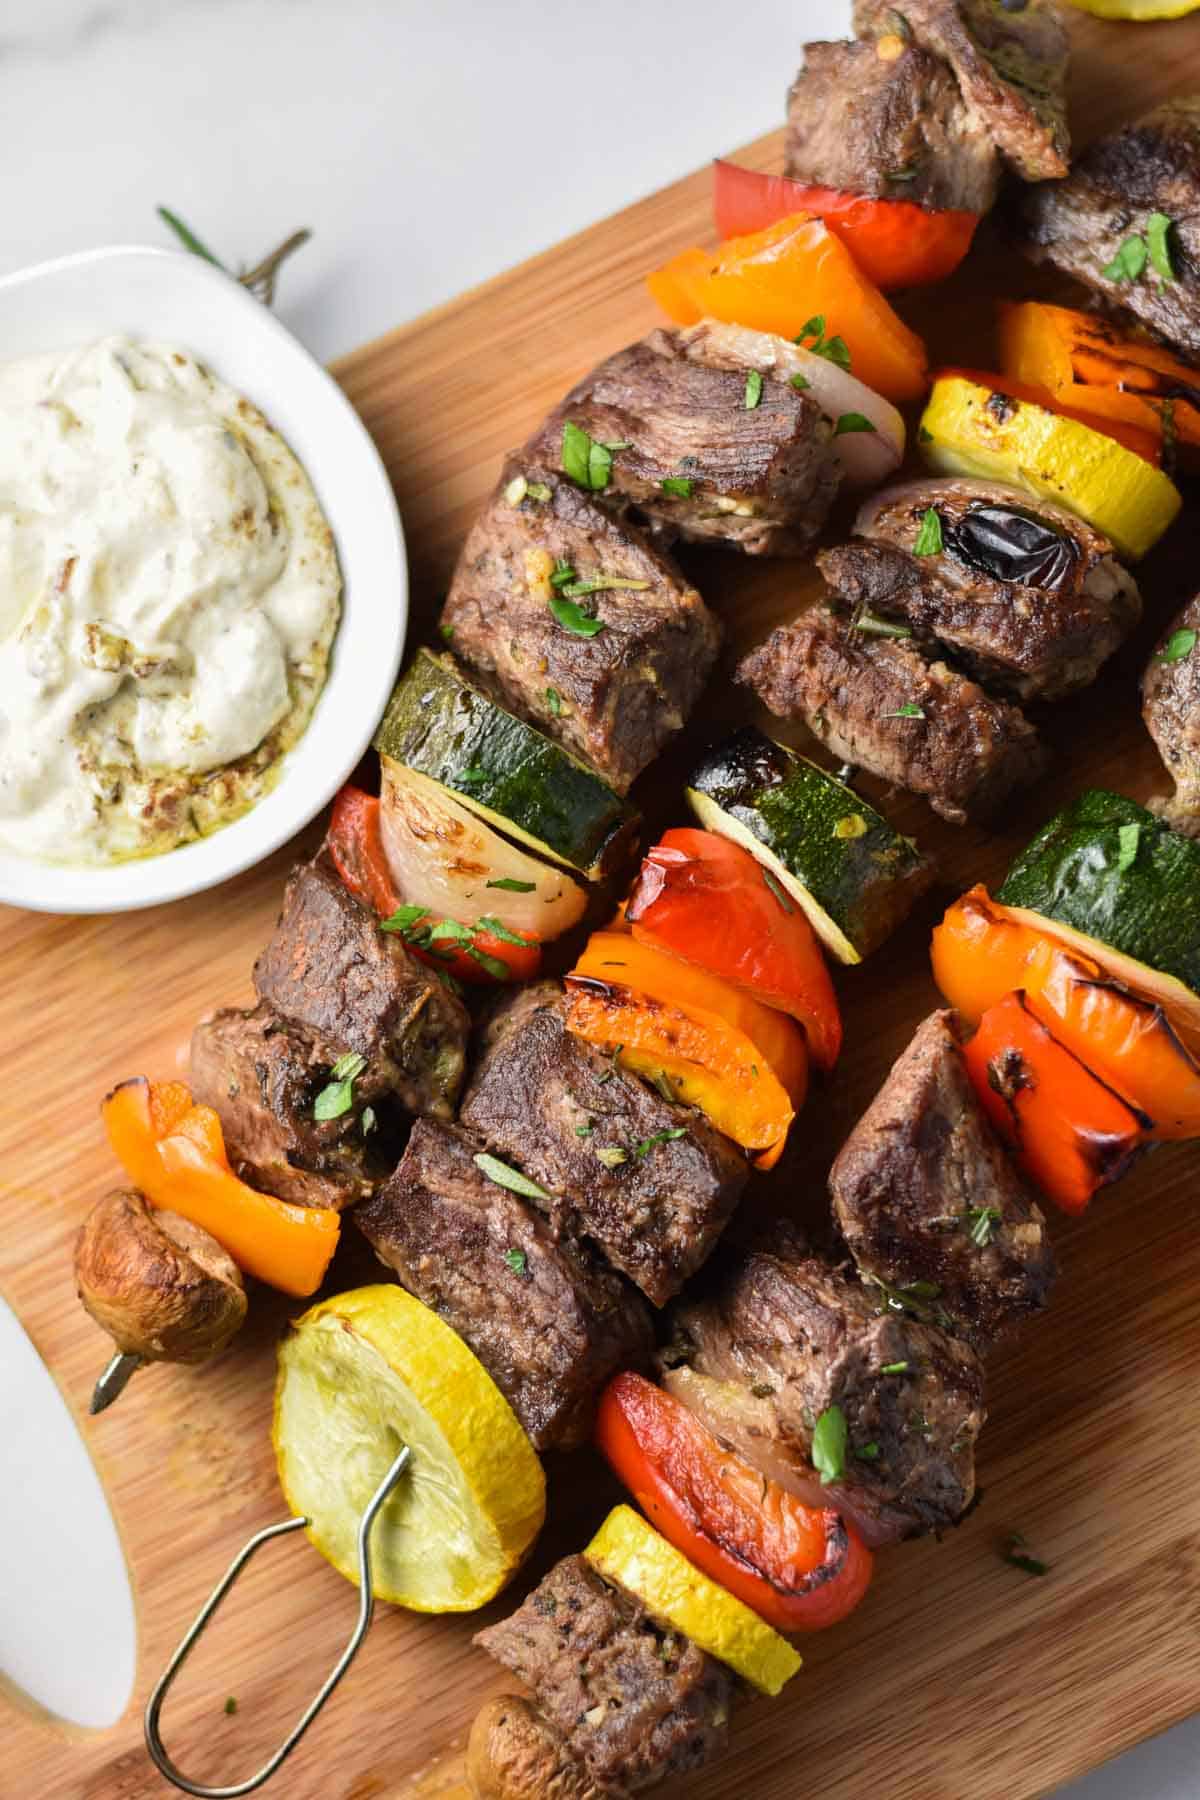 Beef kebobs next to a bowl of zucchini and cottage cheese whipped dip.